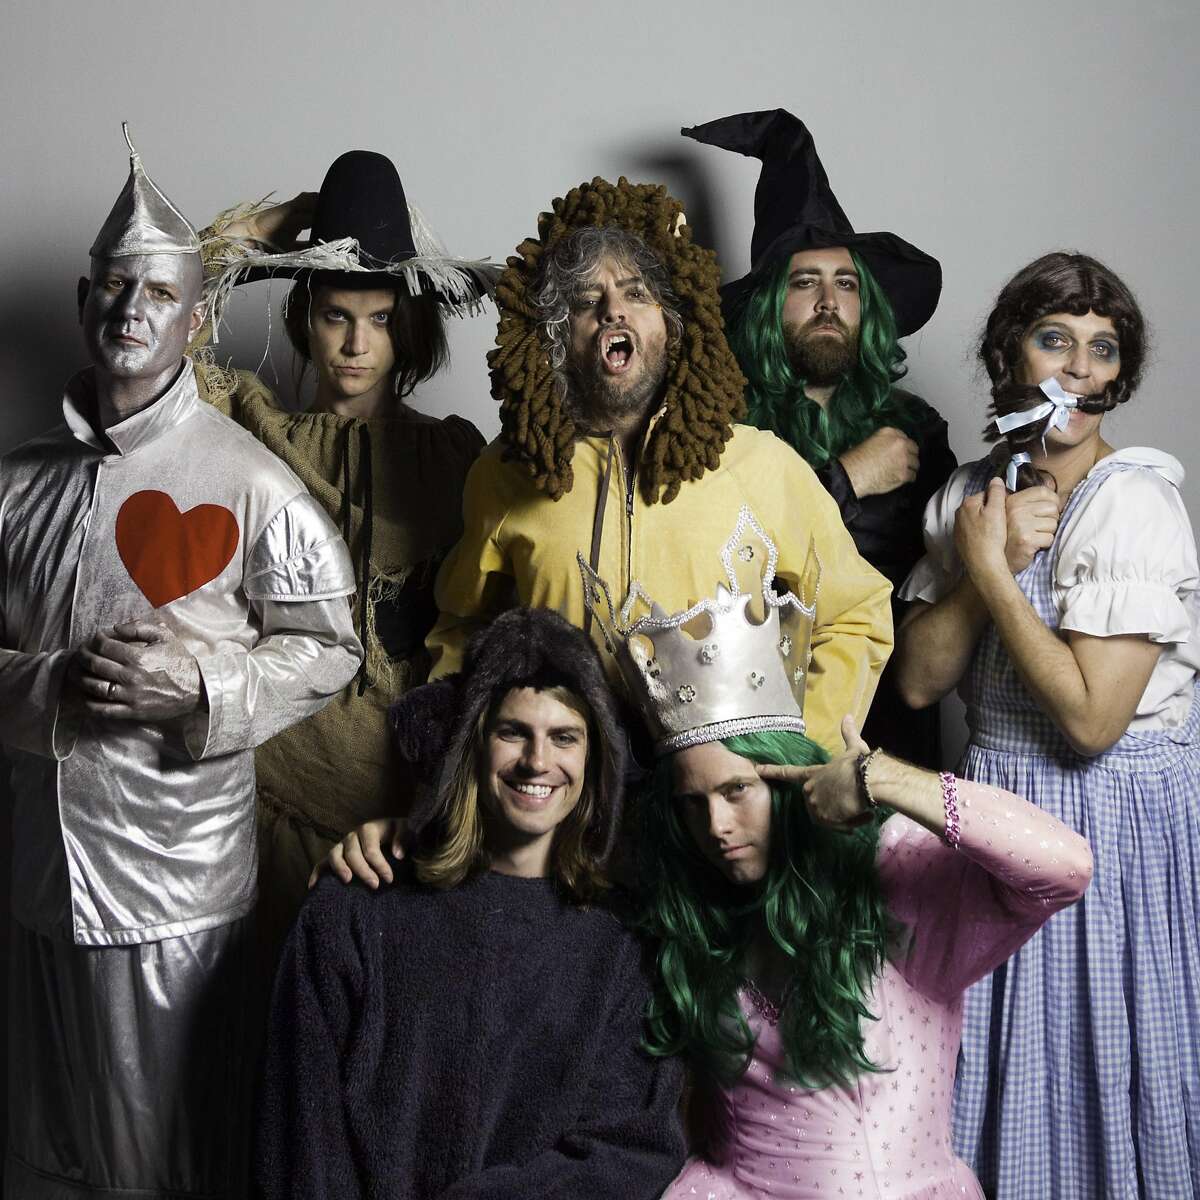 The Flaming Lips are scheduled to perform May 10 at the Fox Theater in Oakland.